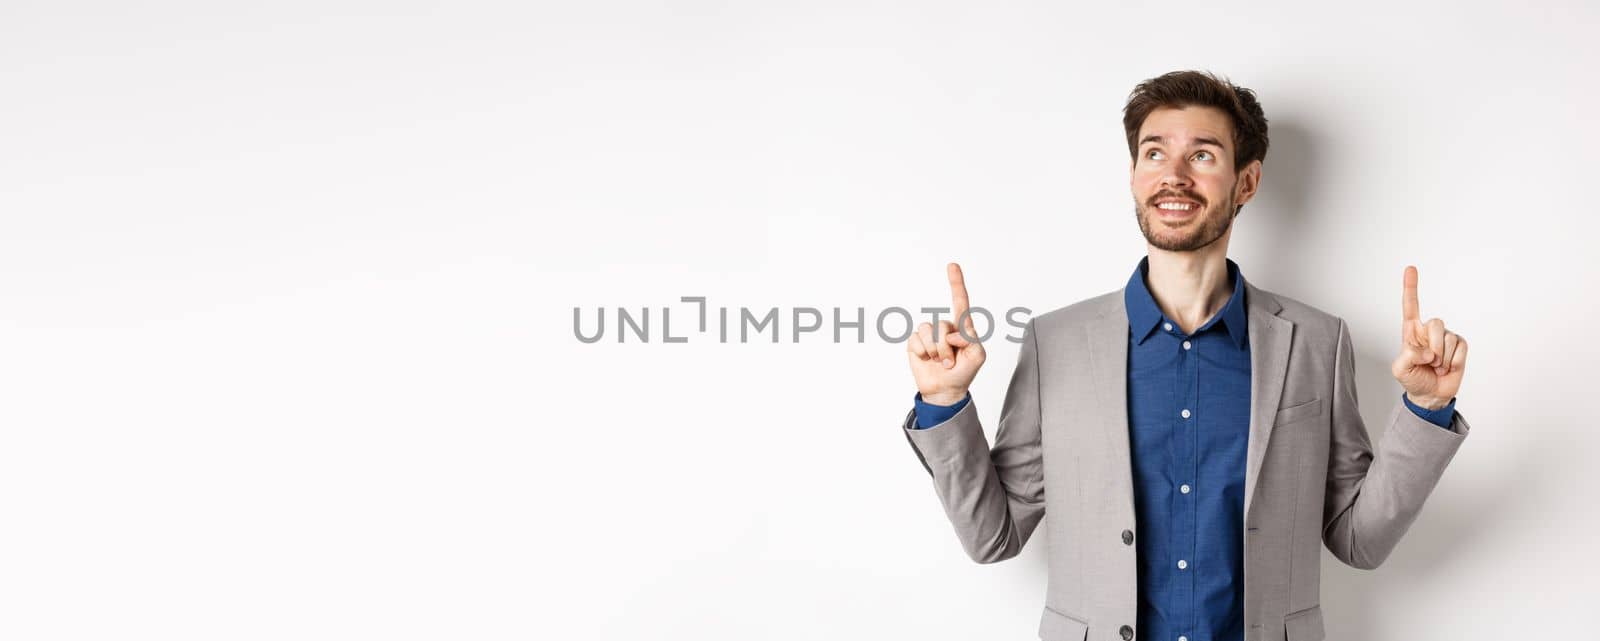 Dreamy smiling male manager in suit pointing and looking up, happy face, checking out advertisement, standing against white background.